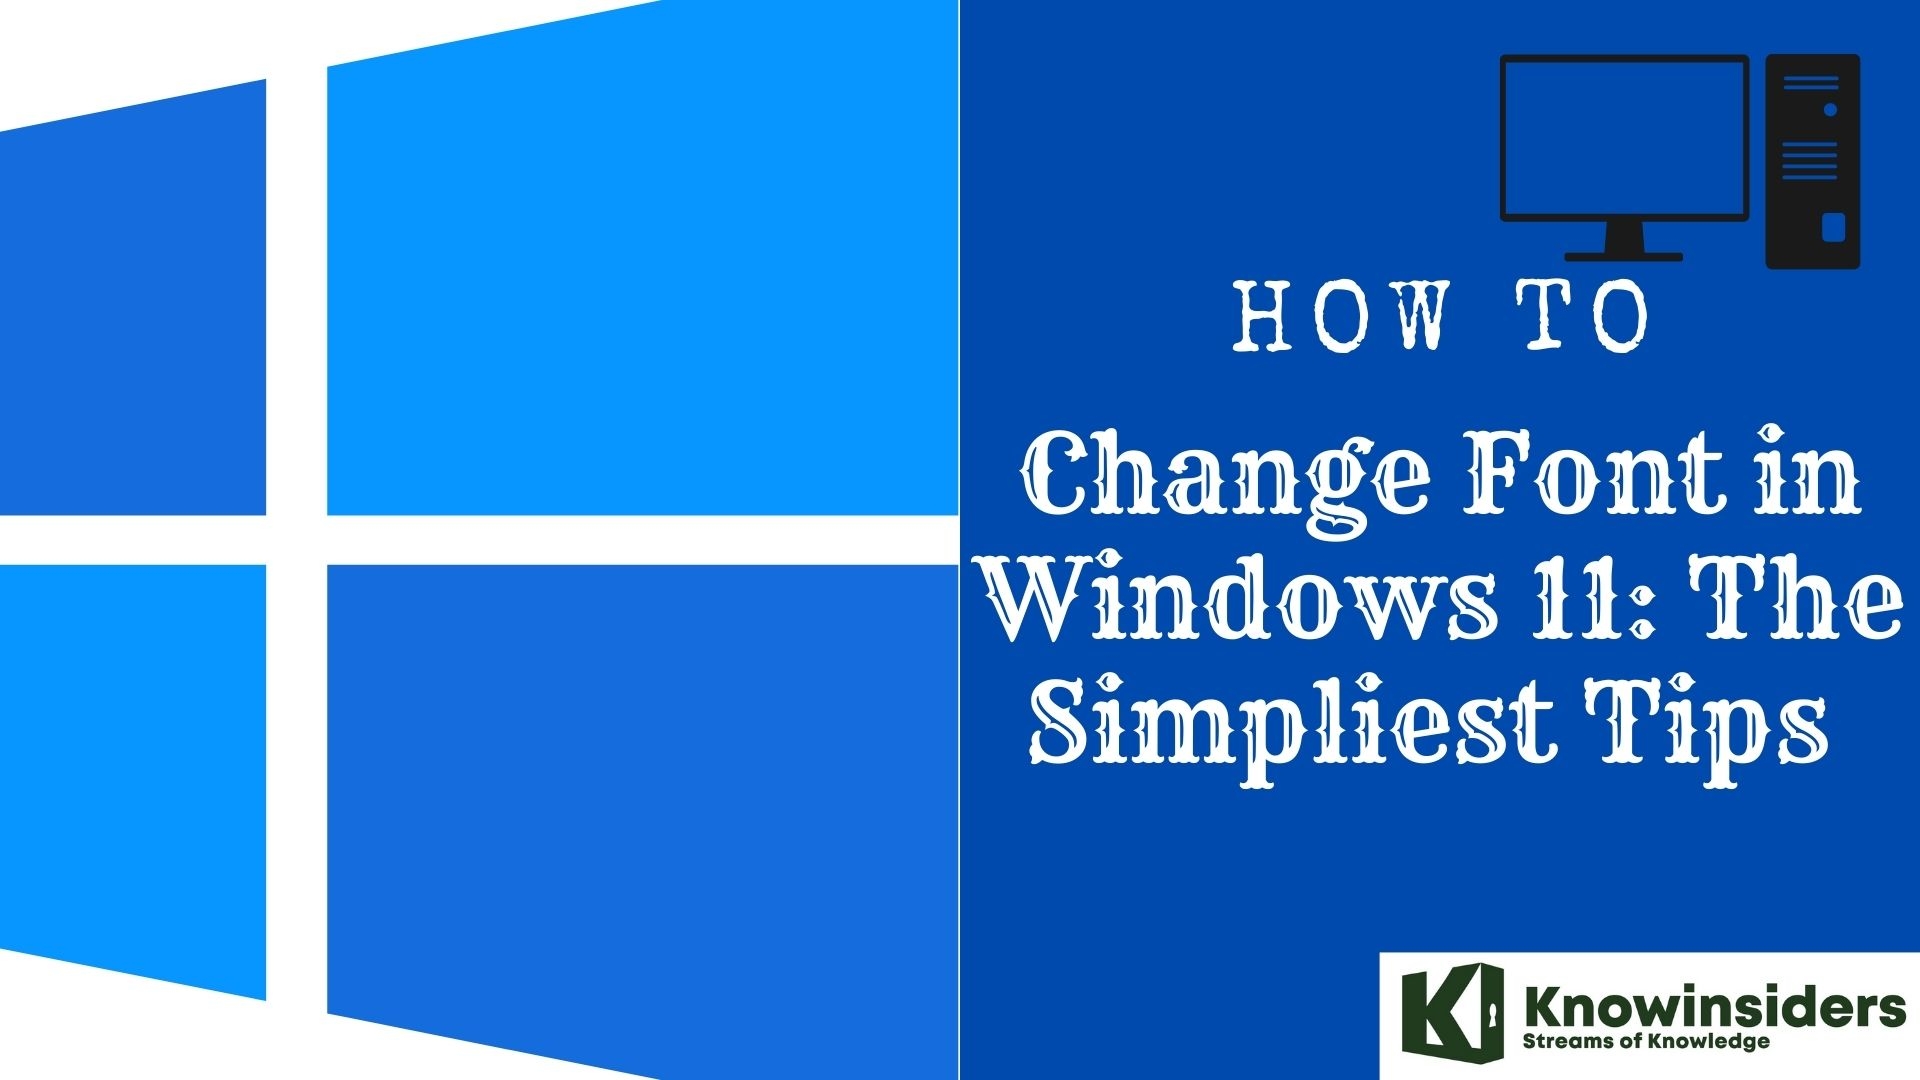 How to Change Font in Windows 11: The Simpliest Tips 